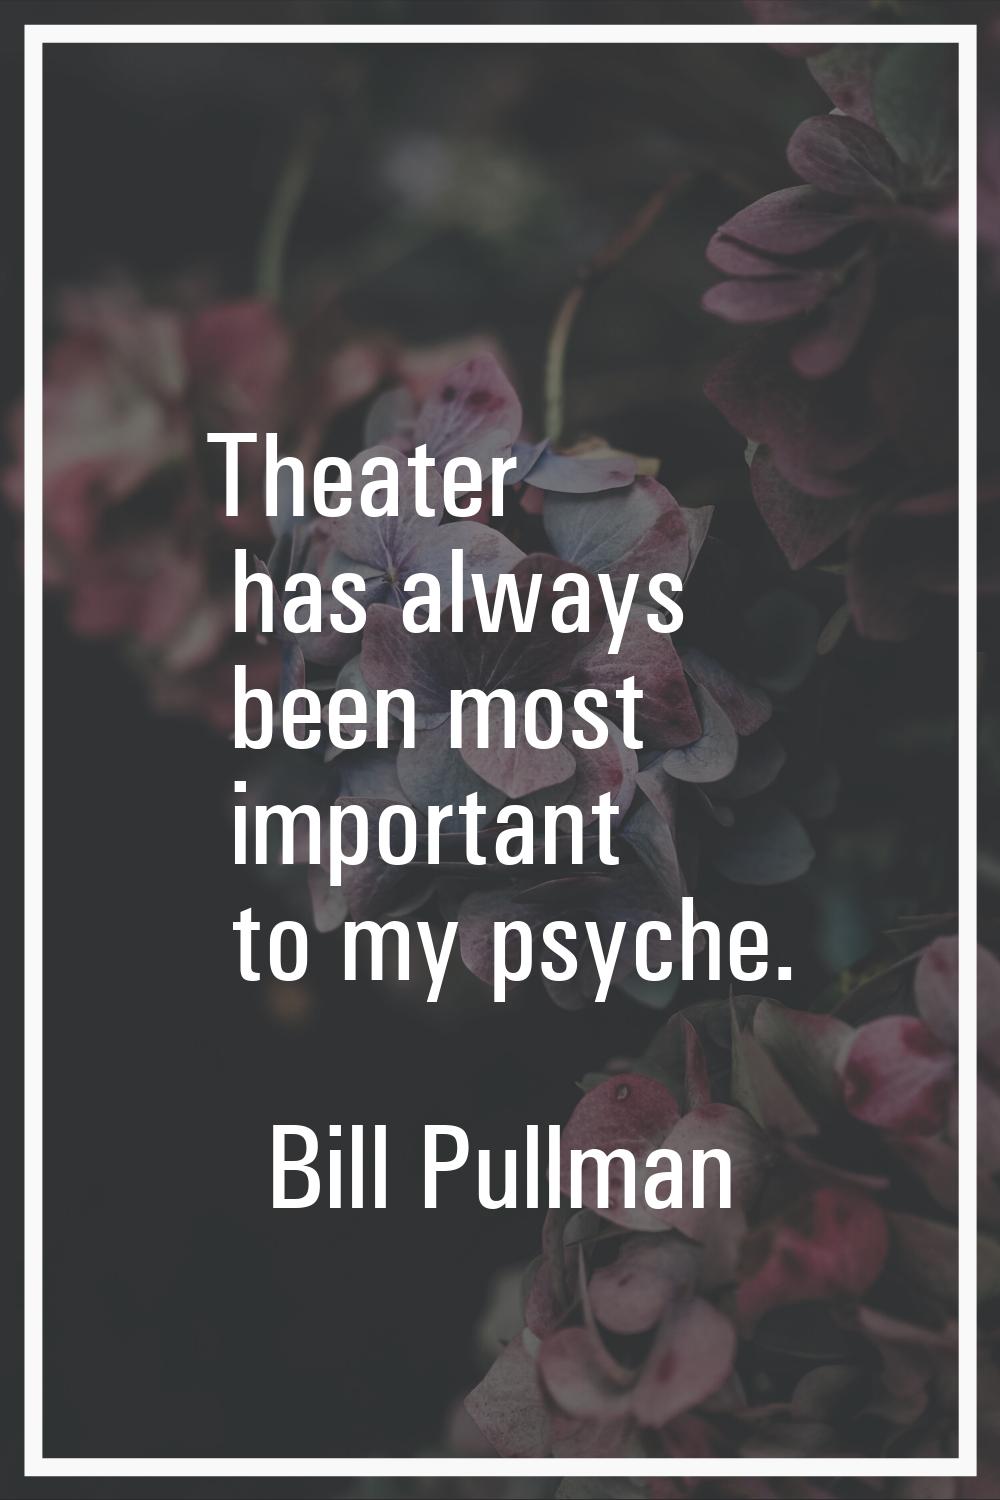 Theater has always been most important to my psyche.